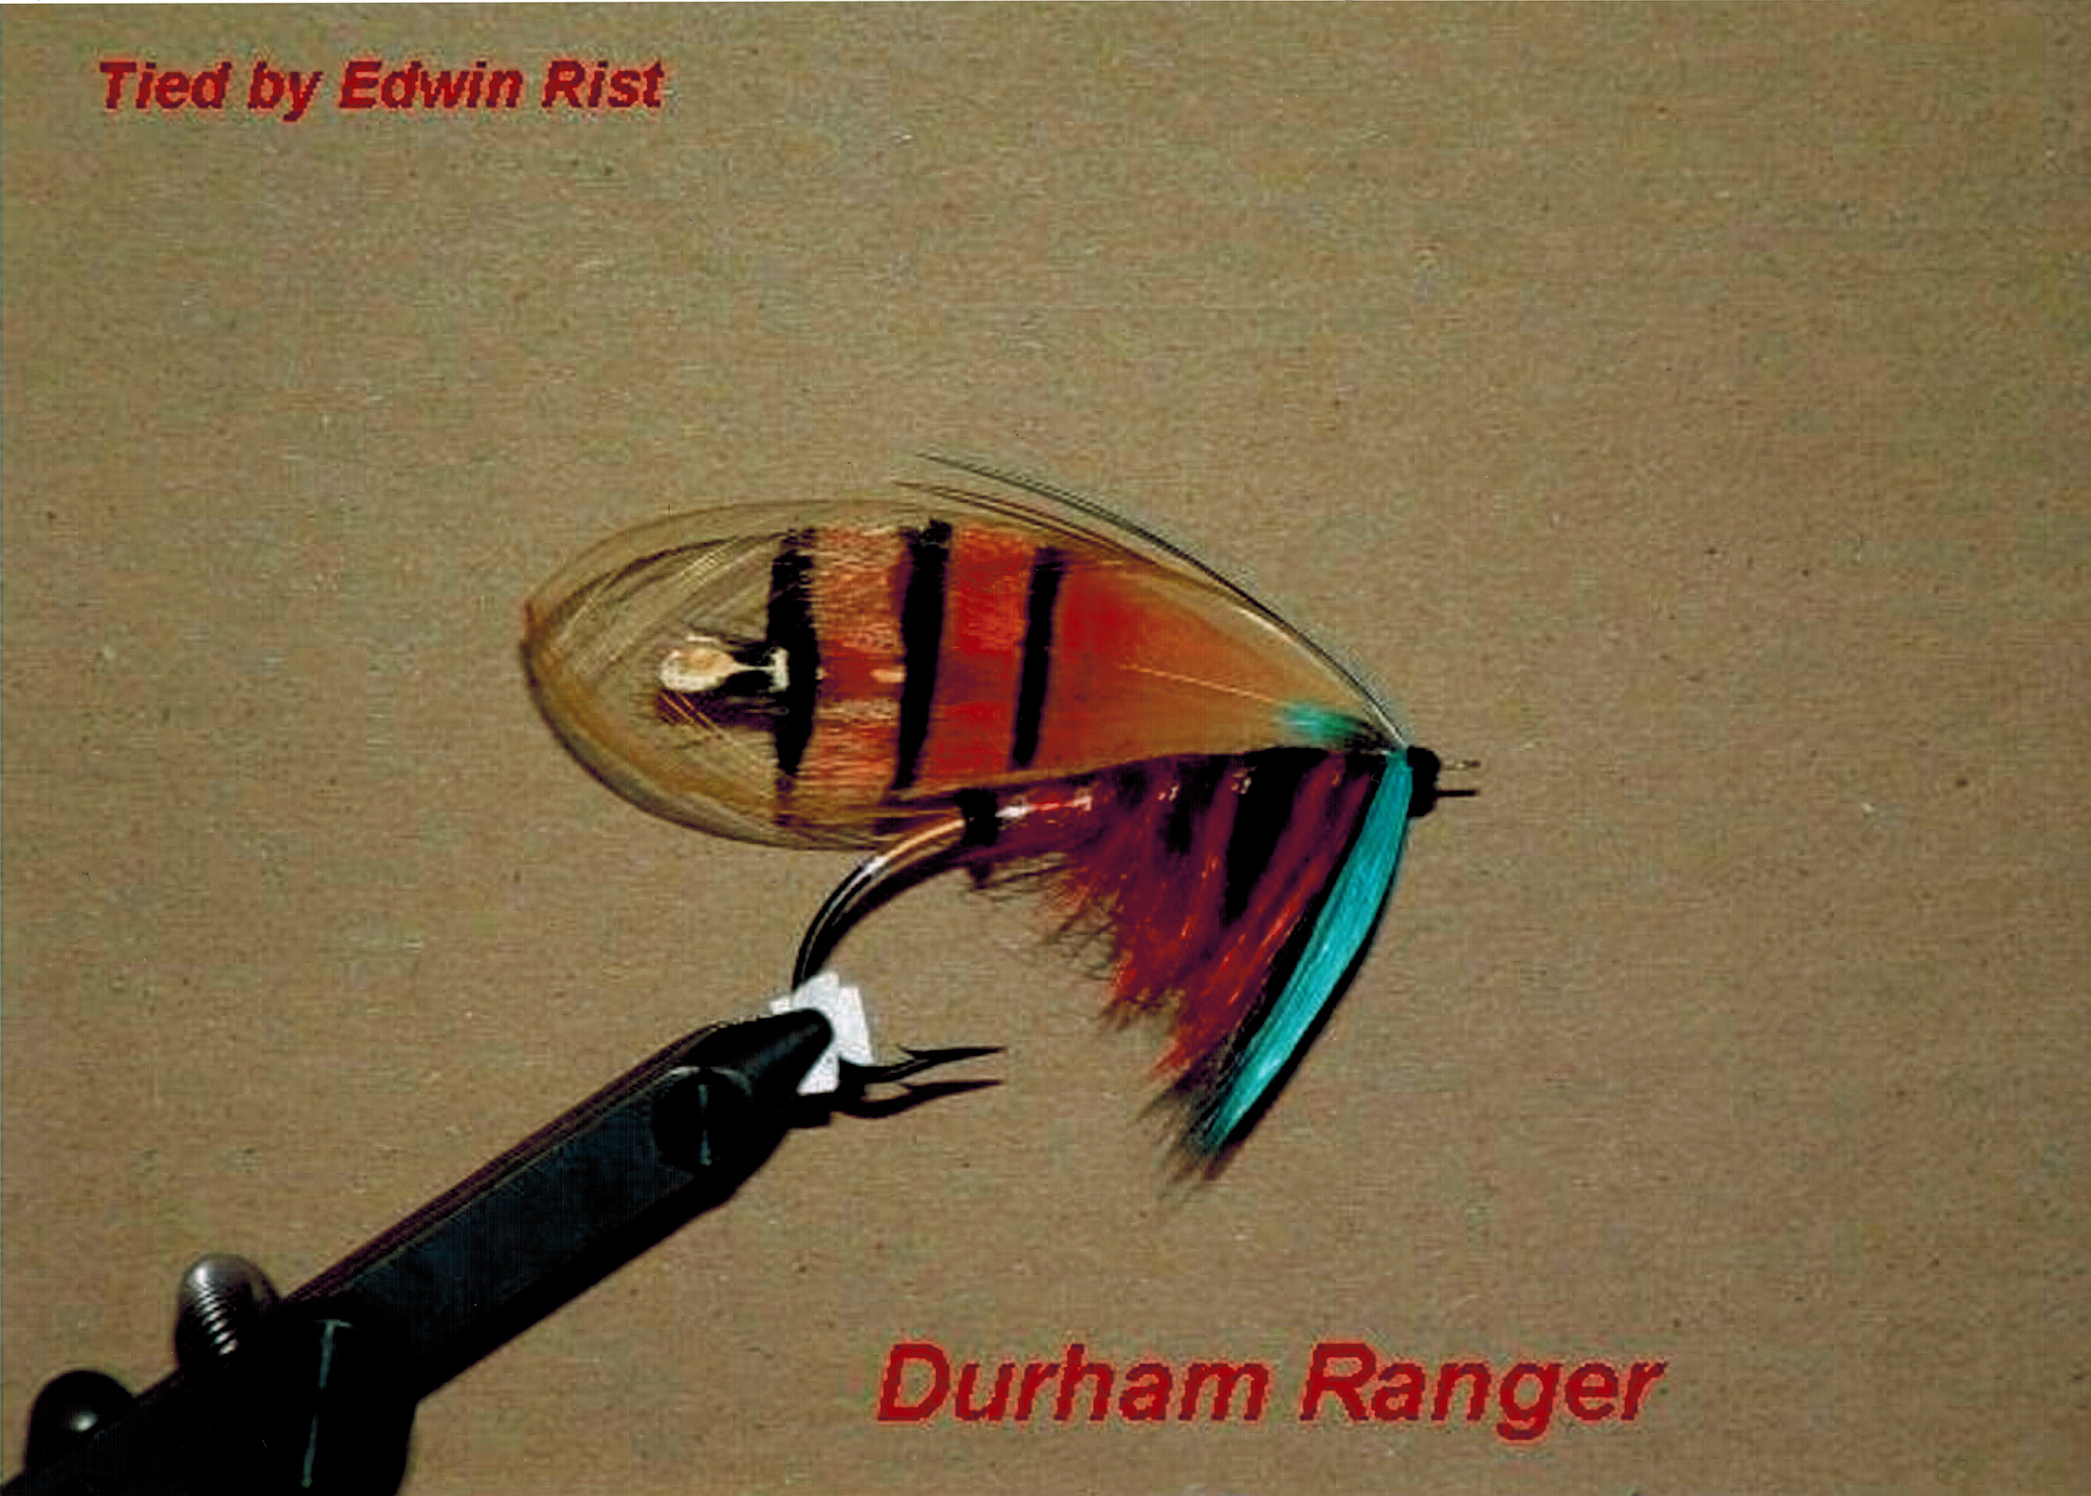 Victorian Salmon Flies and the Birds Used to Make Them - This